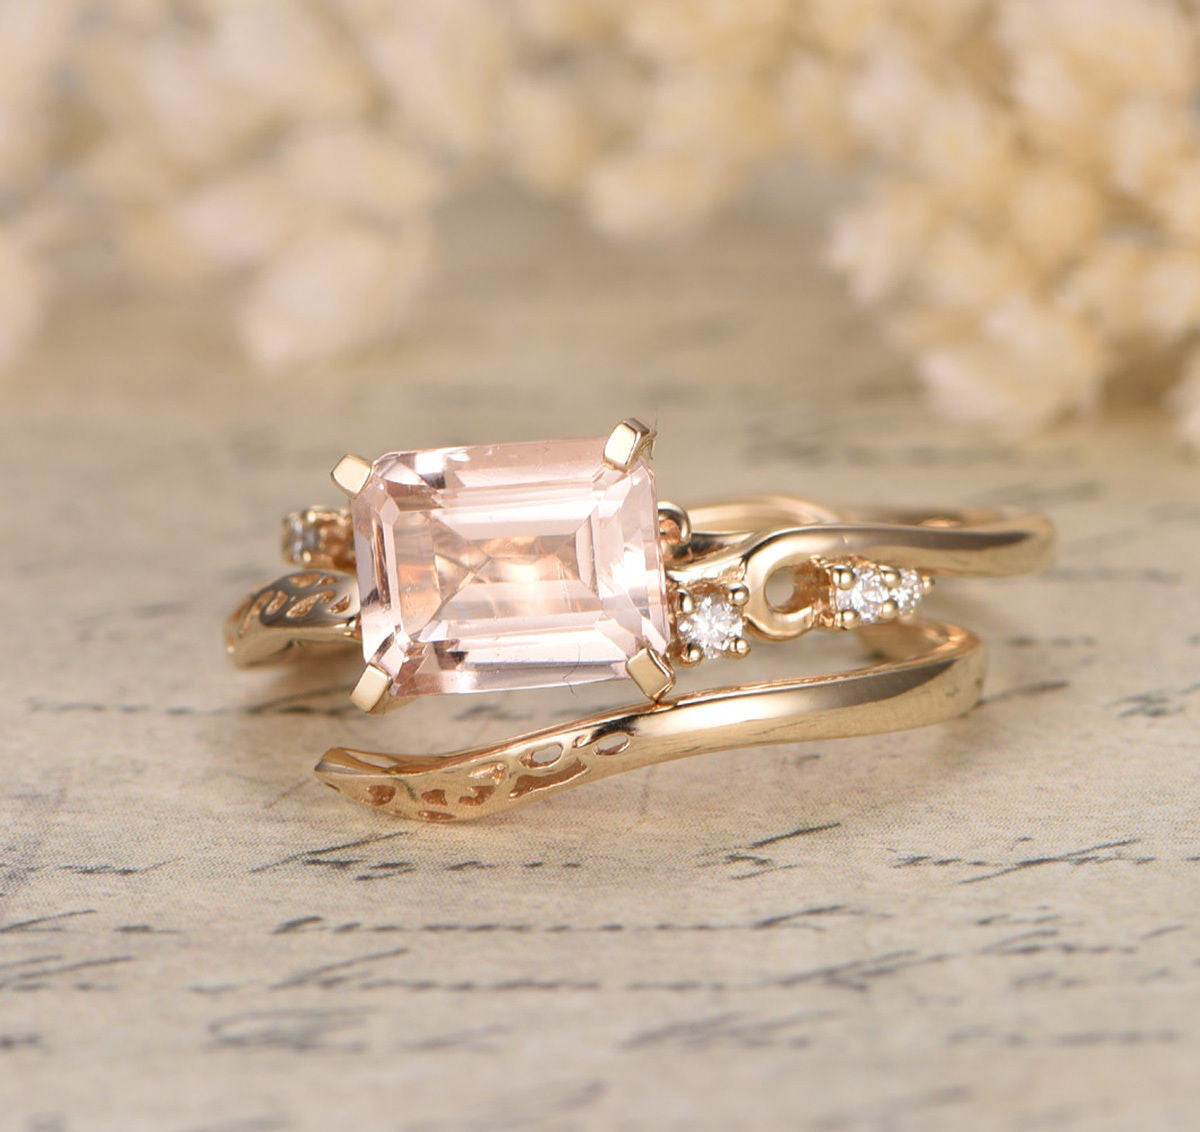 Emerald Cut Morganite Engagement Ring 14K Yellow Gold 7x9mm E-W Direction, Vintage Style - Lord of Gem Rings - 4